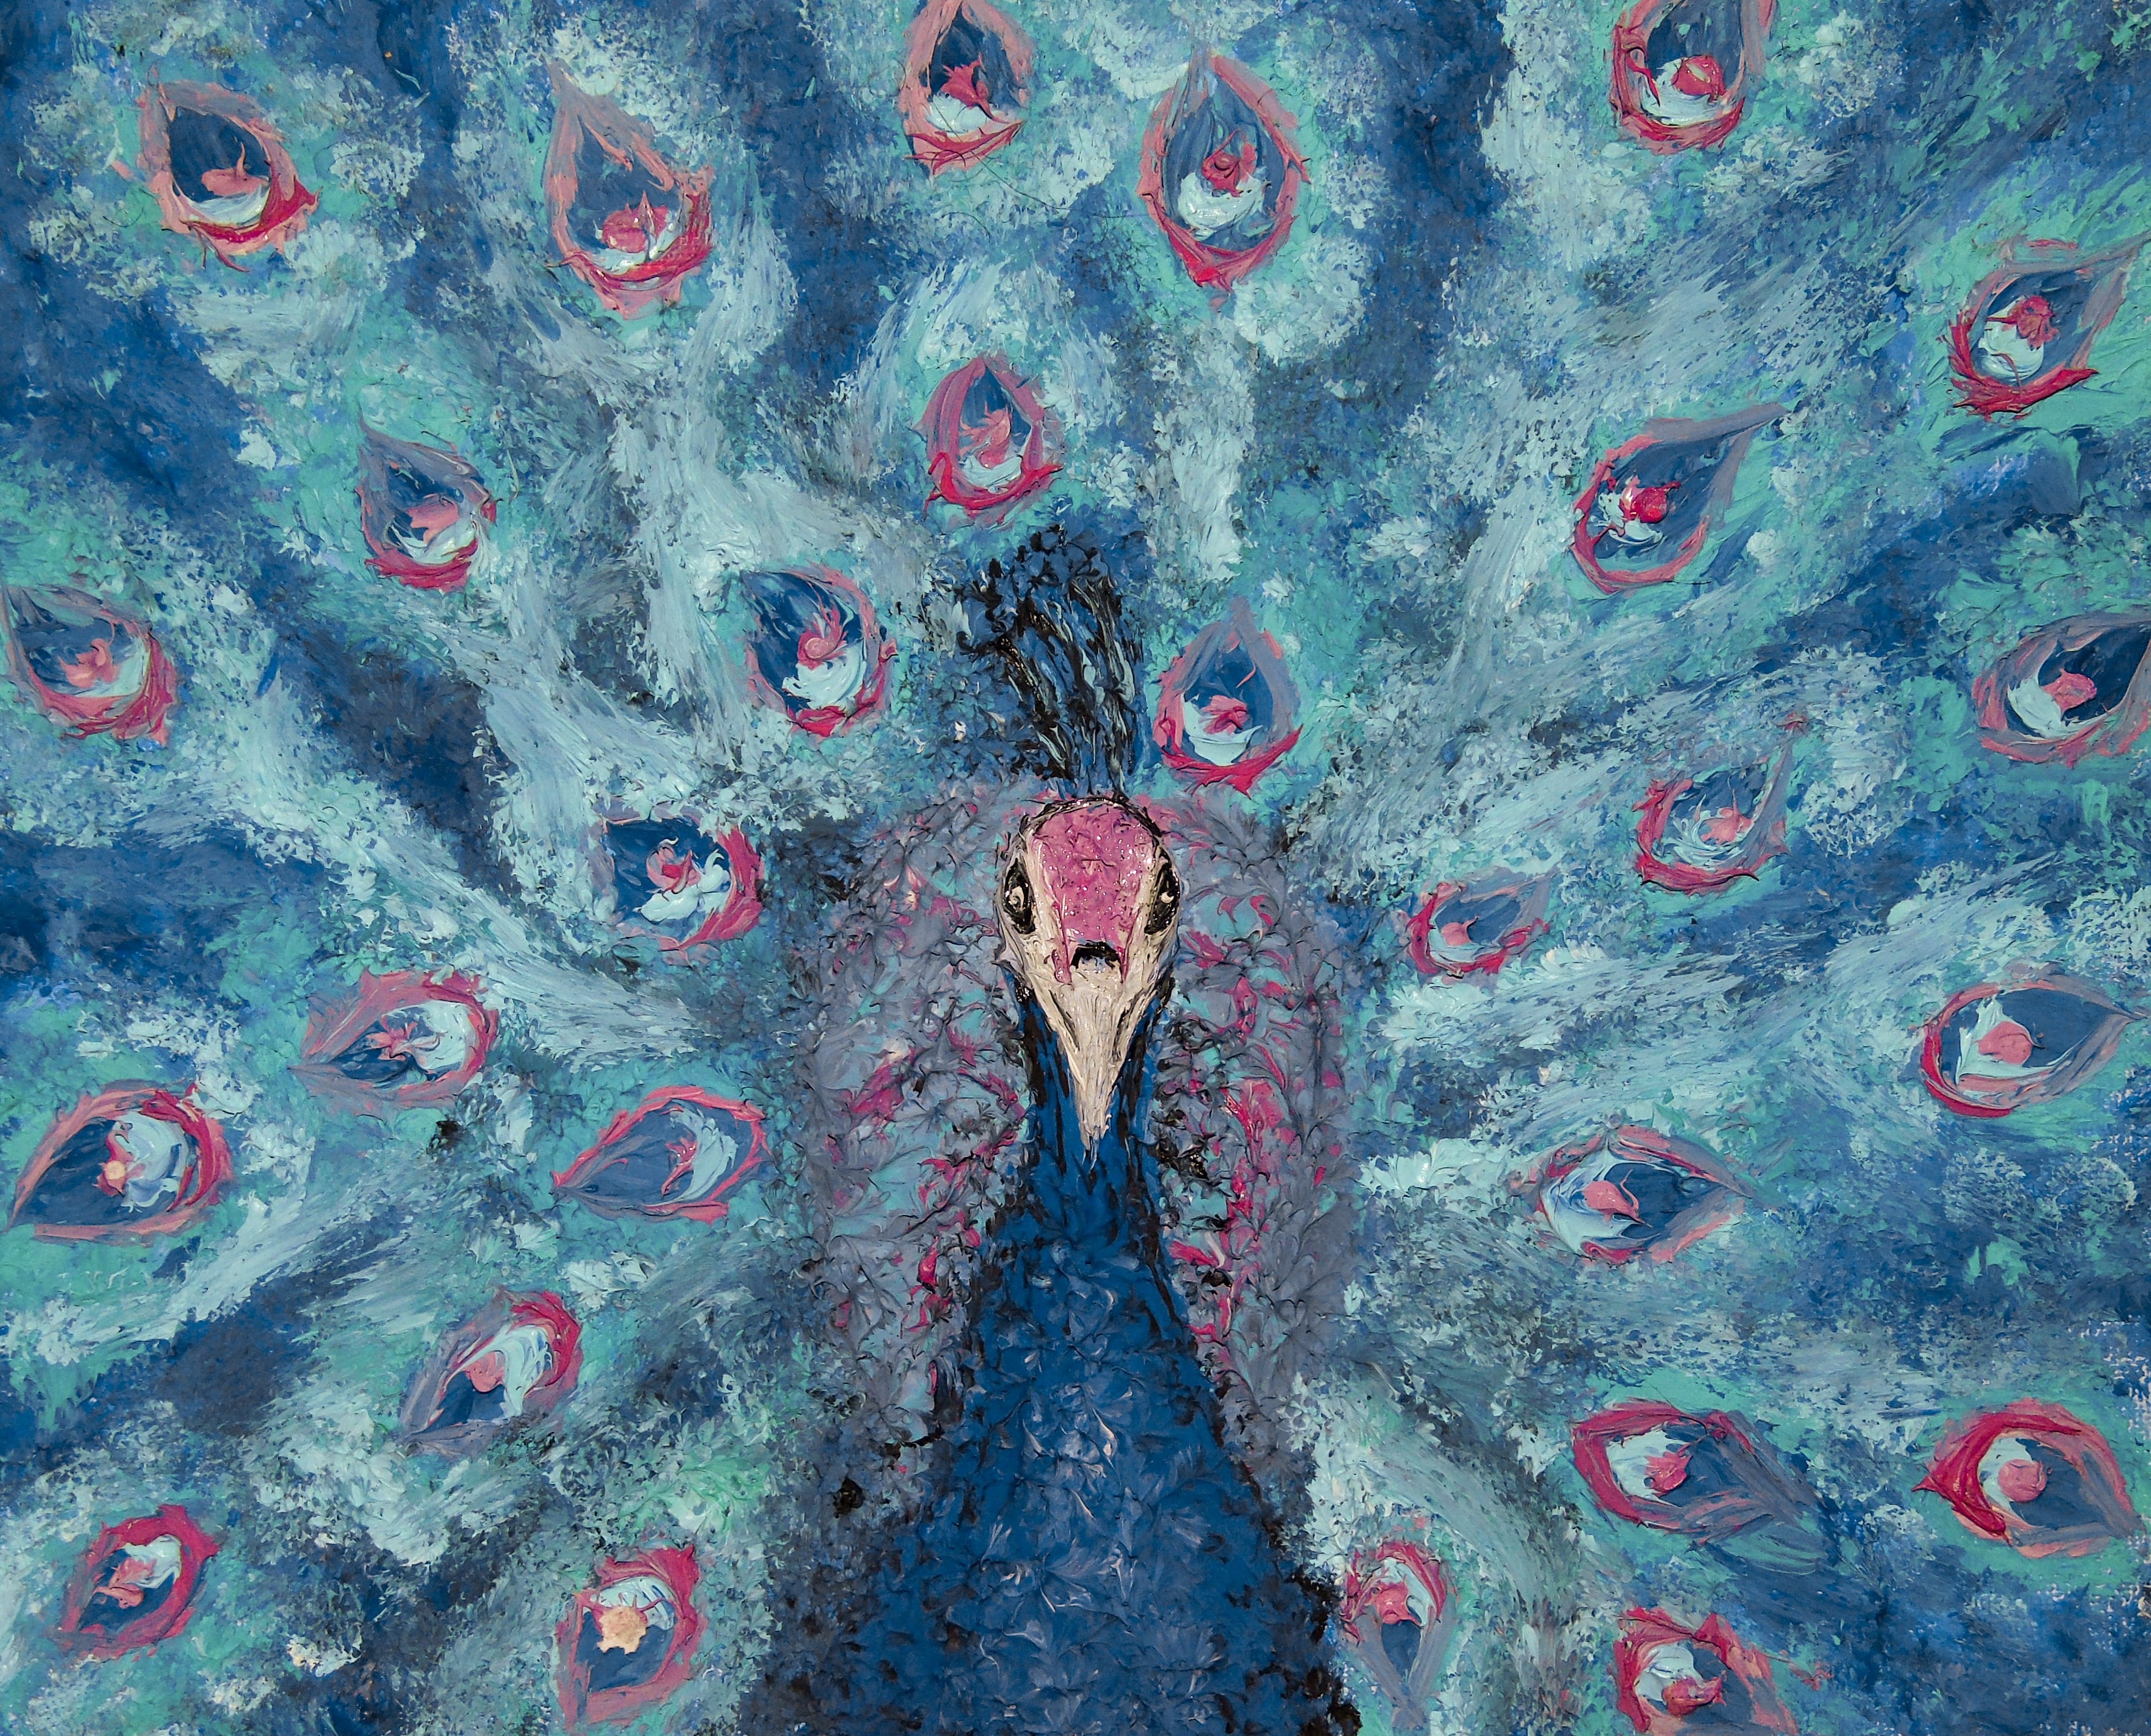 Framed 1 Panel - Portrait of a Blue and Pink Peacock